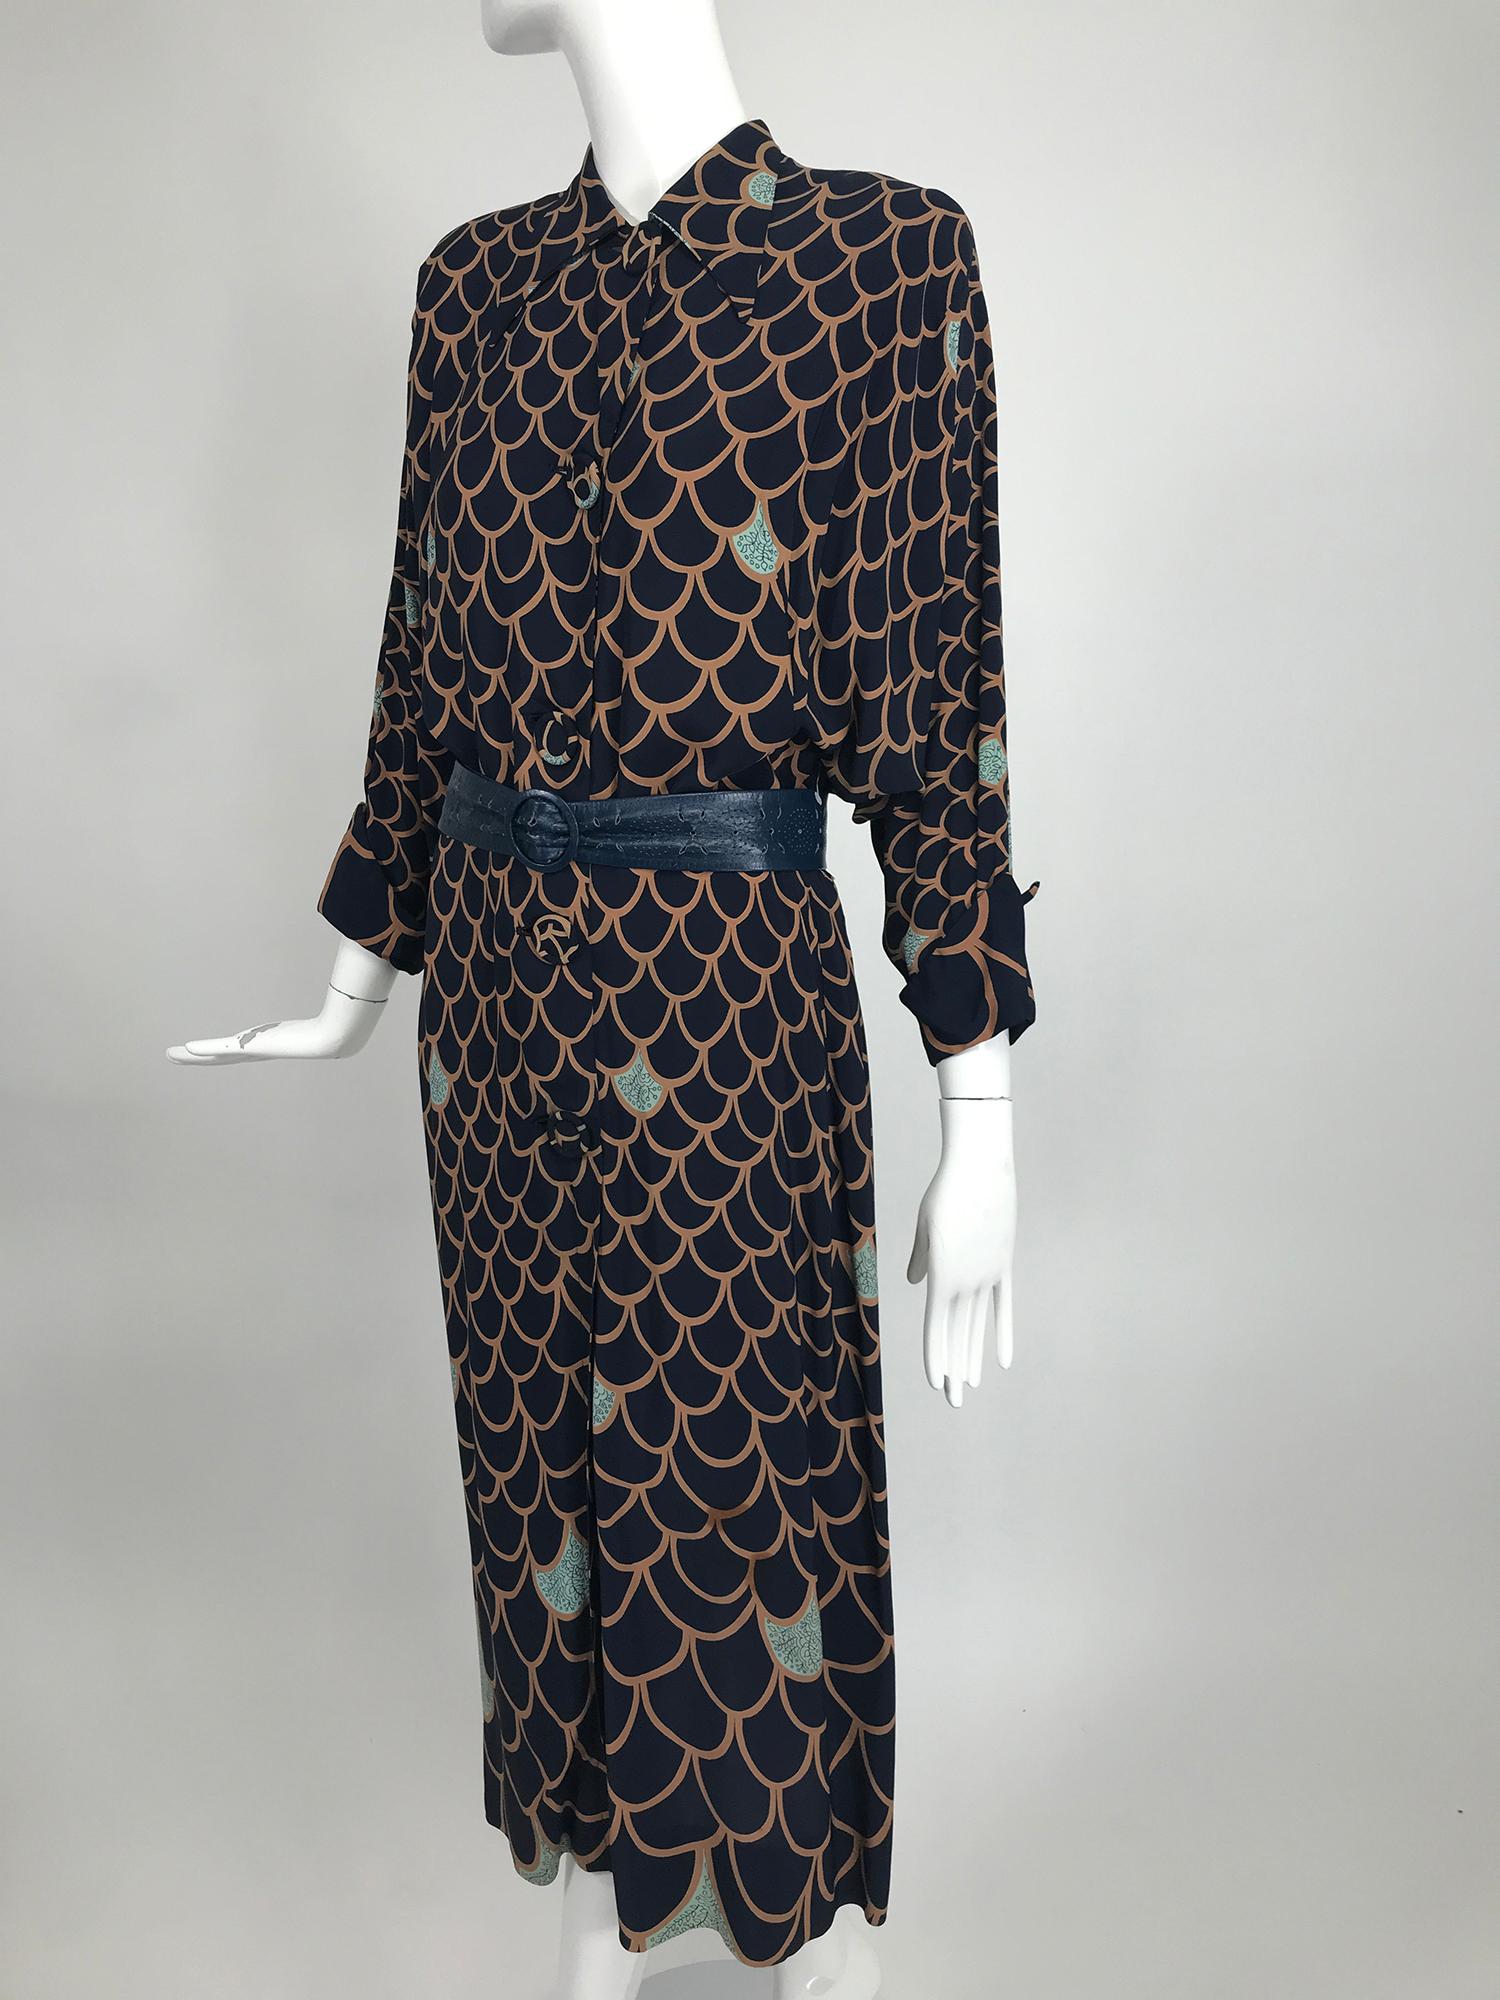 Vintage, Original Franklin Fashions Chicago, rayon print day dress from the 1940s. The print of this dress is very interesting, like fish scales, this print graduates from small to large, light brown and dark blue, with scattered turquoise 